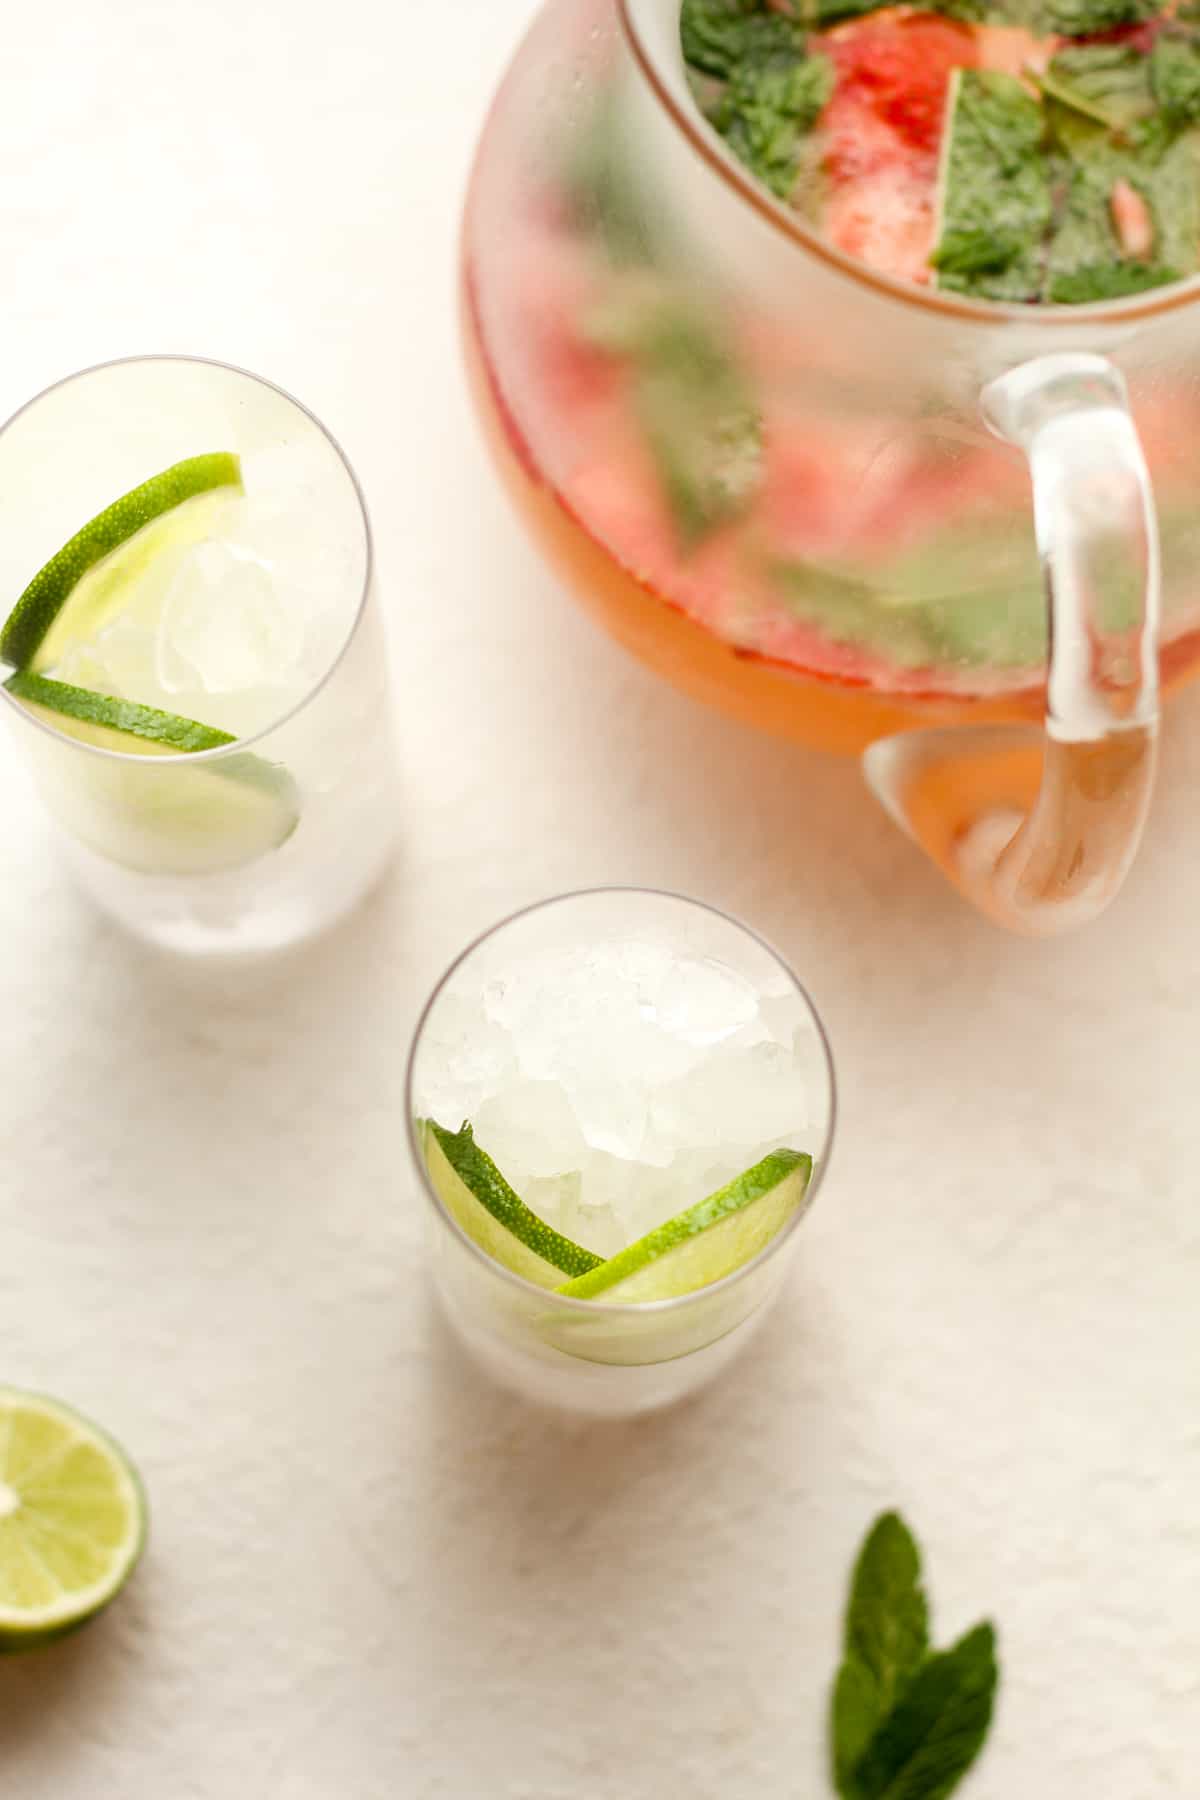 Overhead view of two glasses filled with ice and some lime slices.